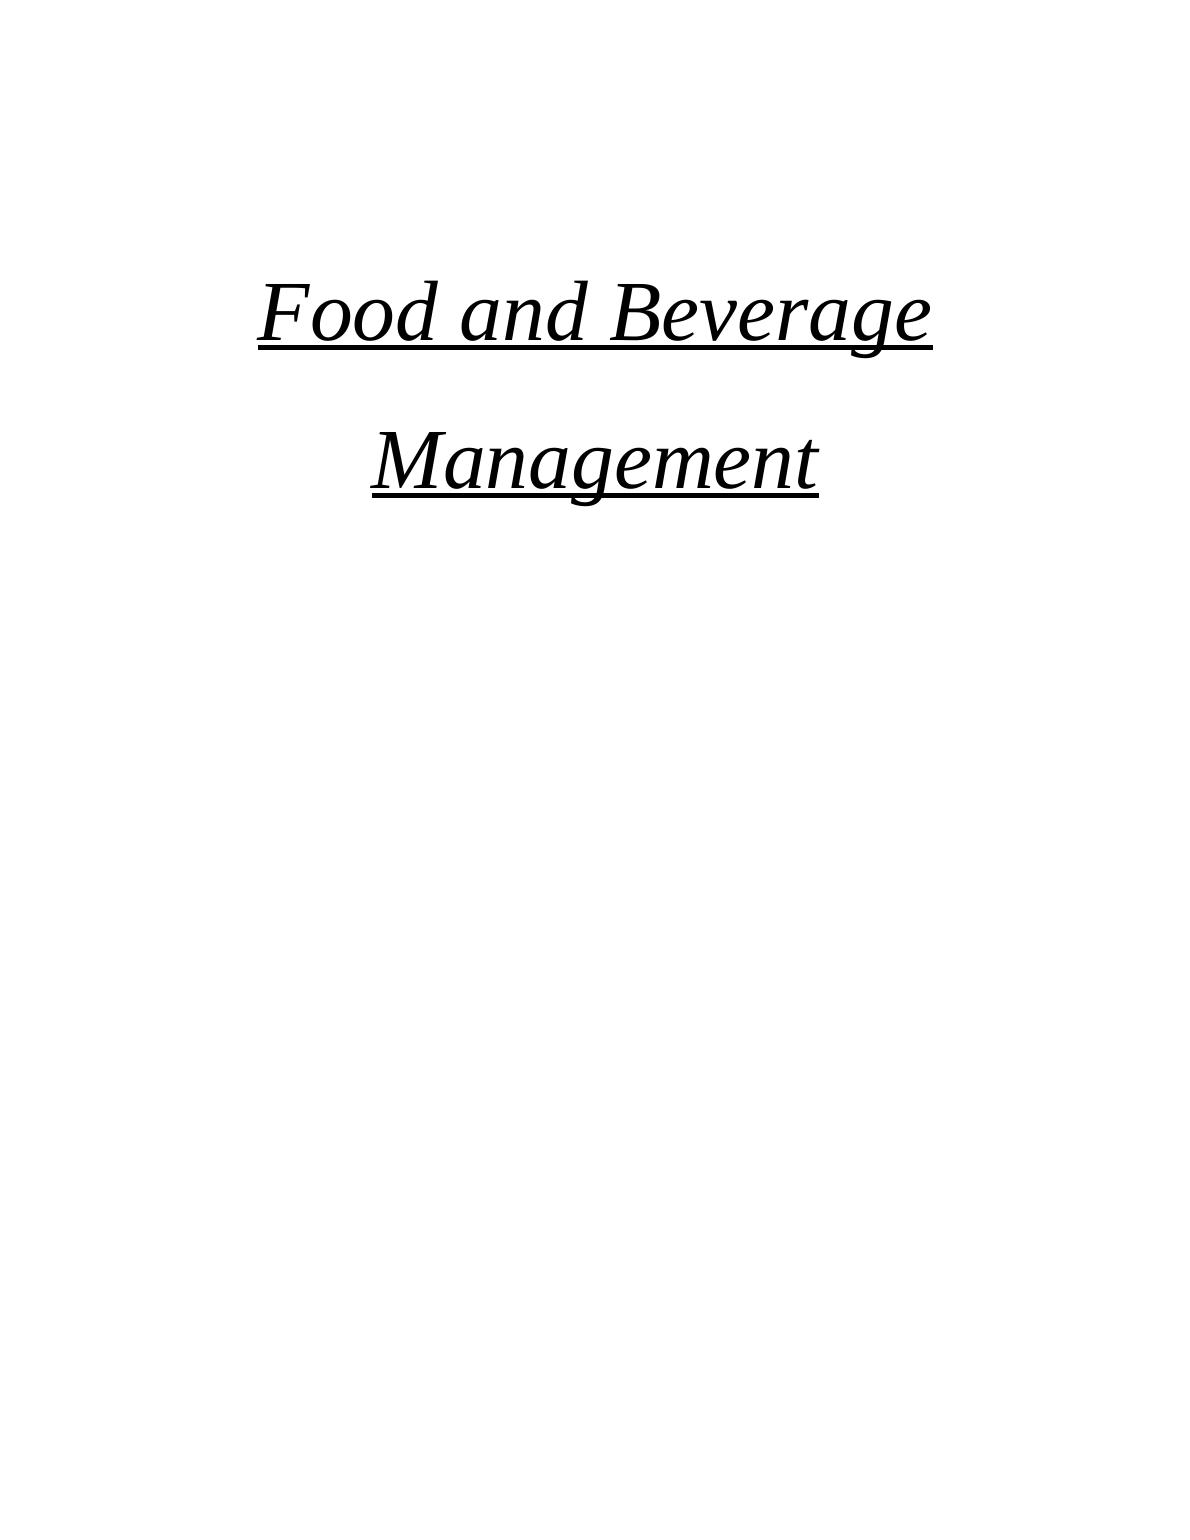 Food and Beverage Management Analysis_1